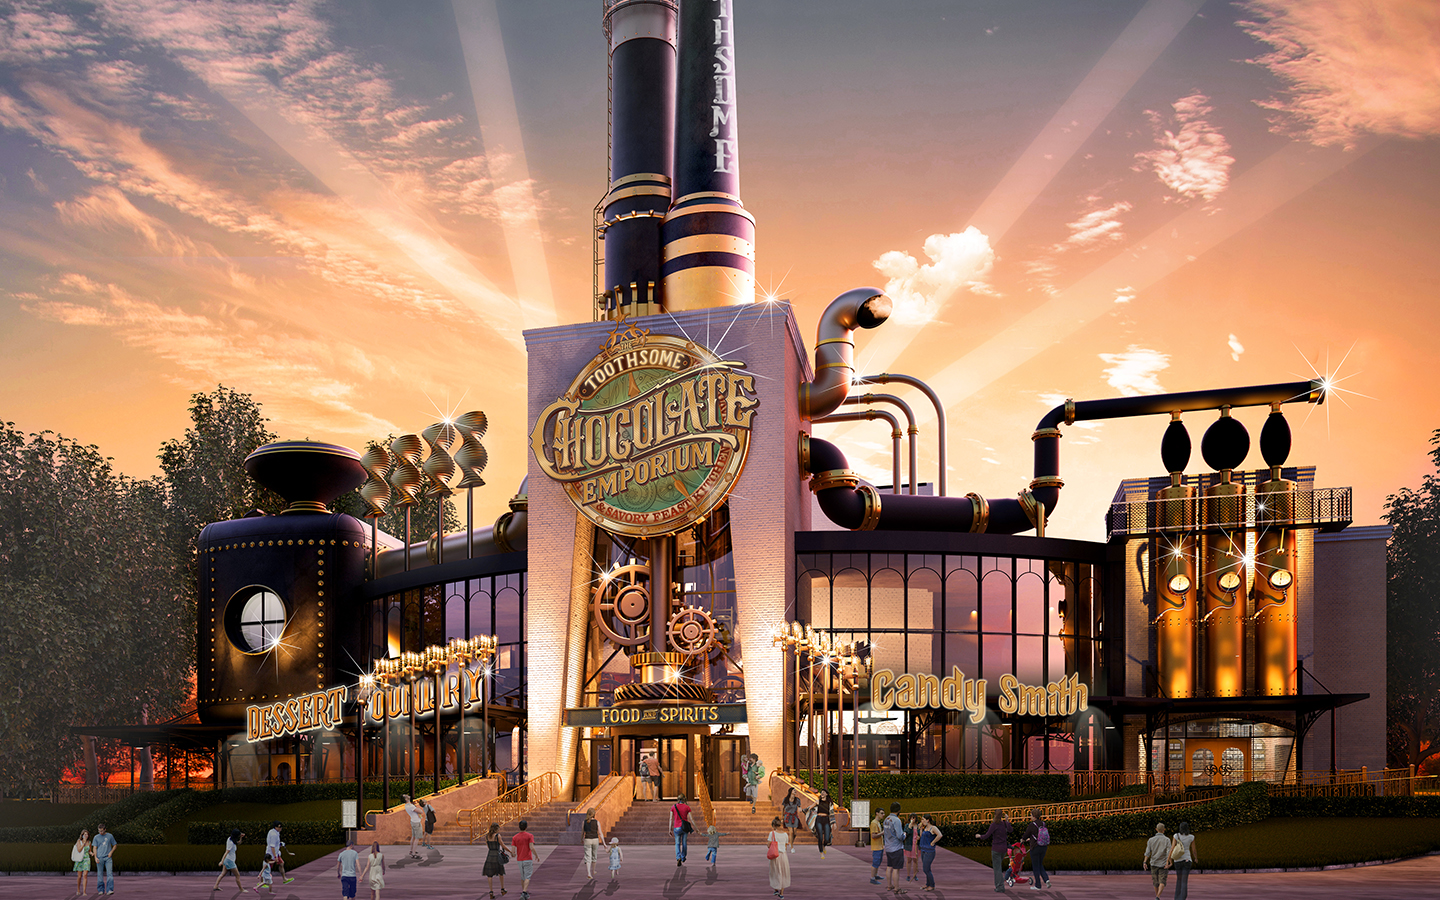 Discover the story behind Universal CityWalk's newest original concept - The Toothsome Chocolate Emporium & Savory Feast Kitchen